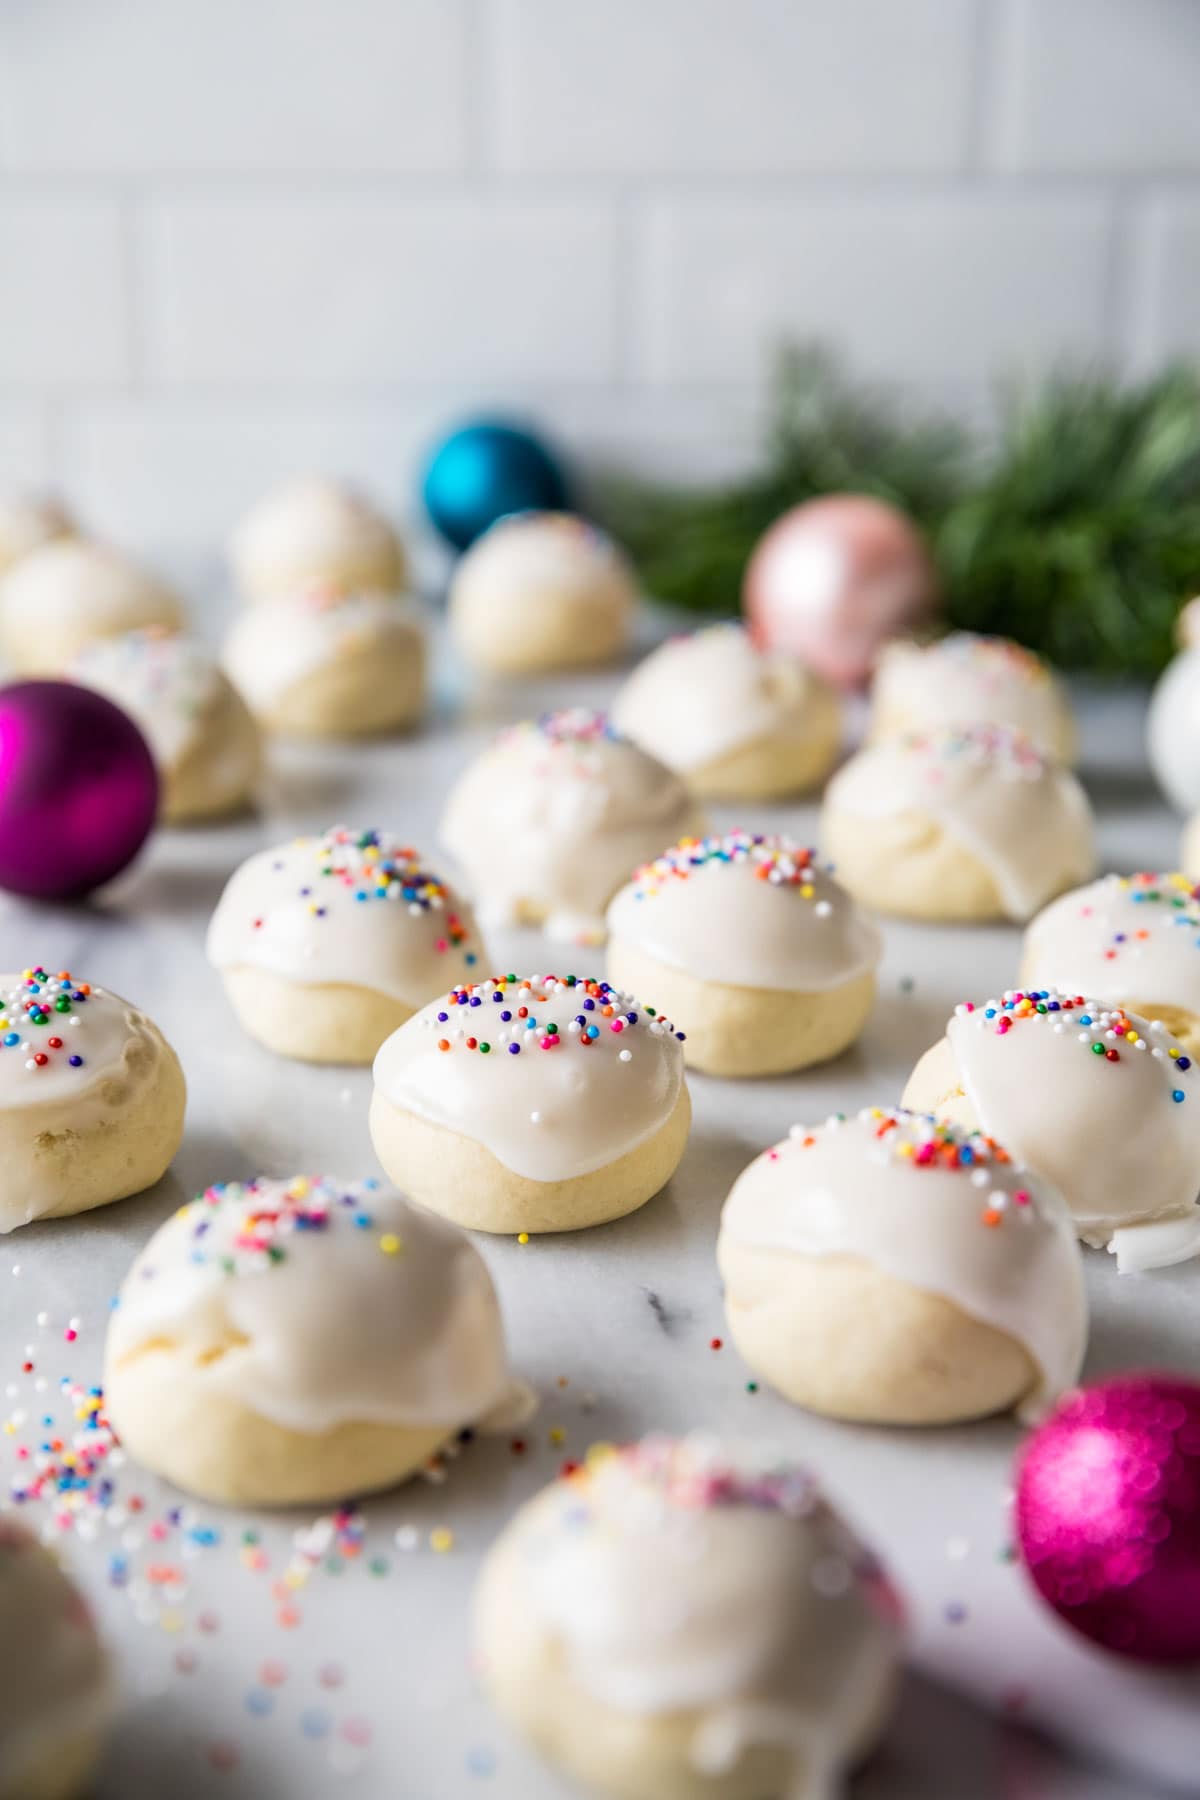 Round cookies topped with a white icing and rainbow nonpareil sprinkles with colorful Christmas ornaments mixed in.